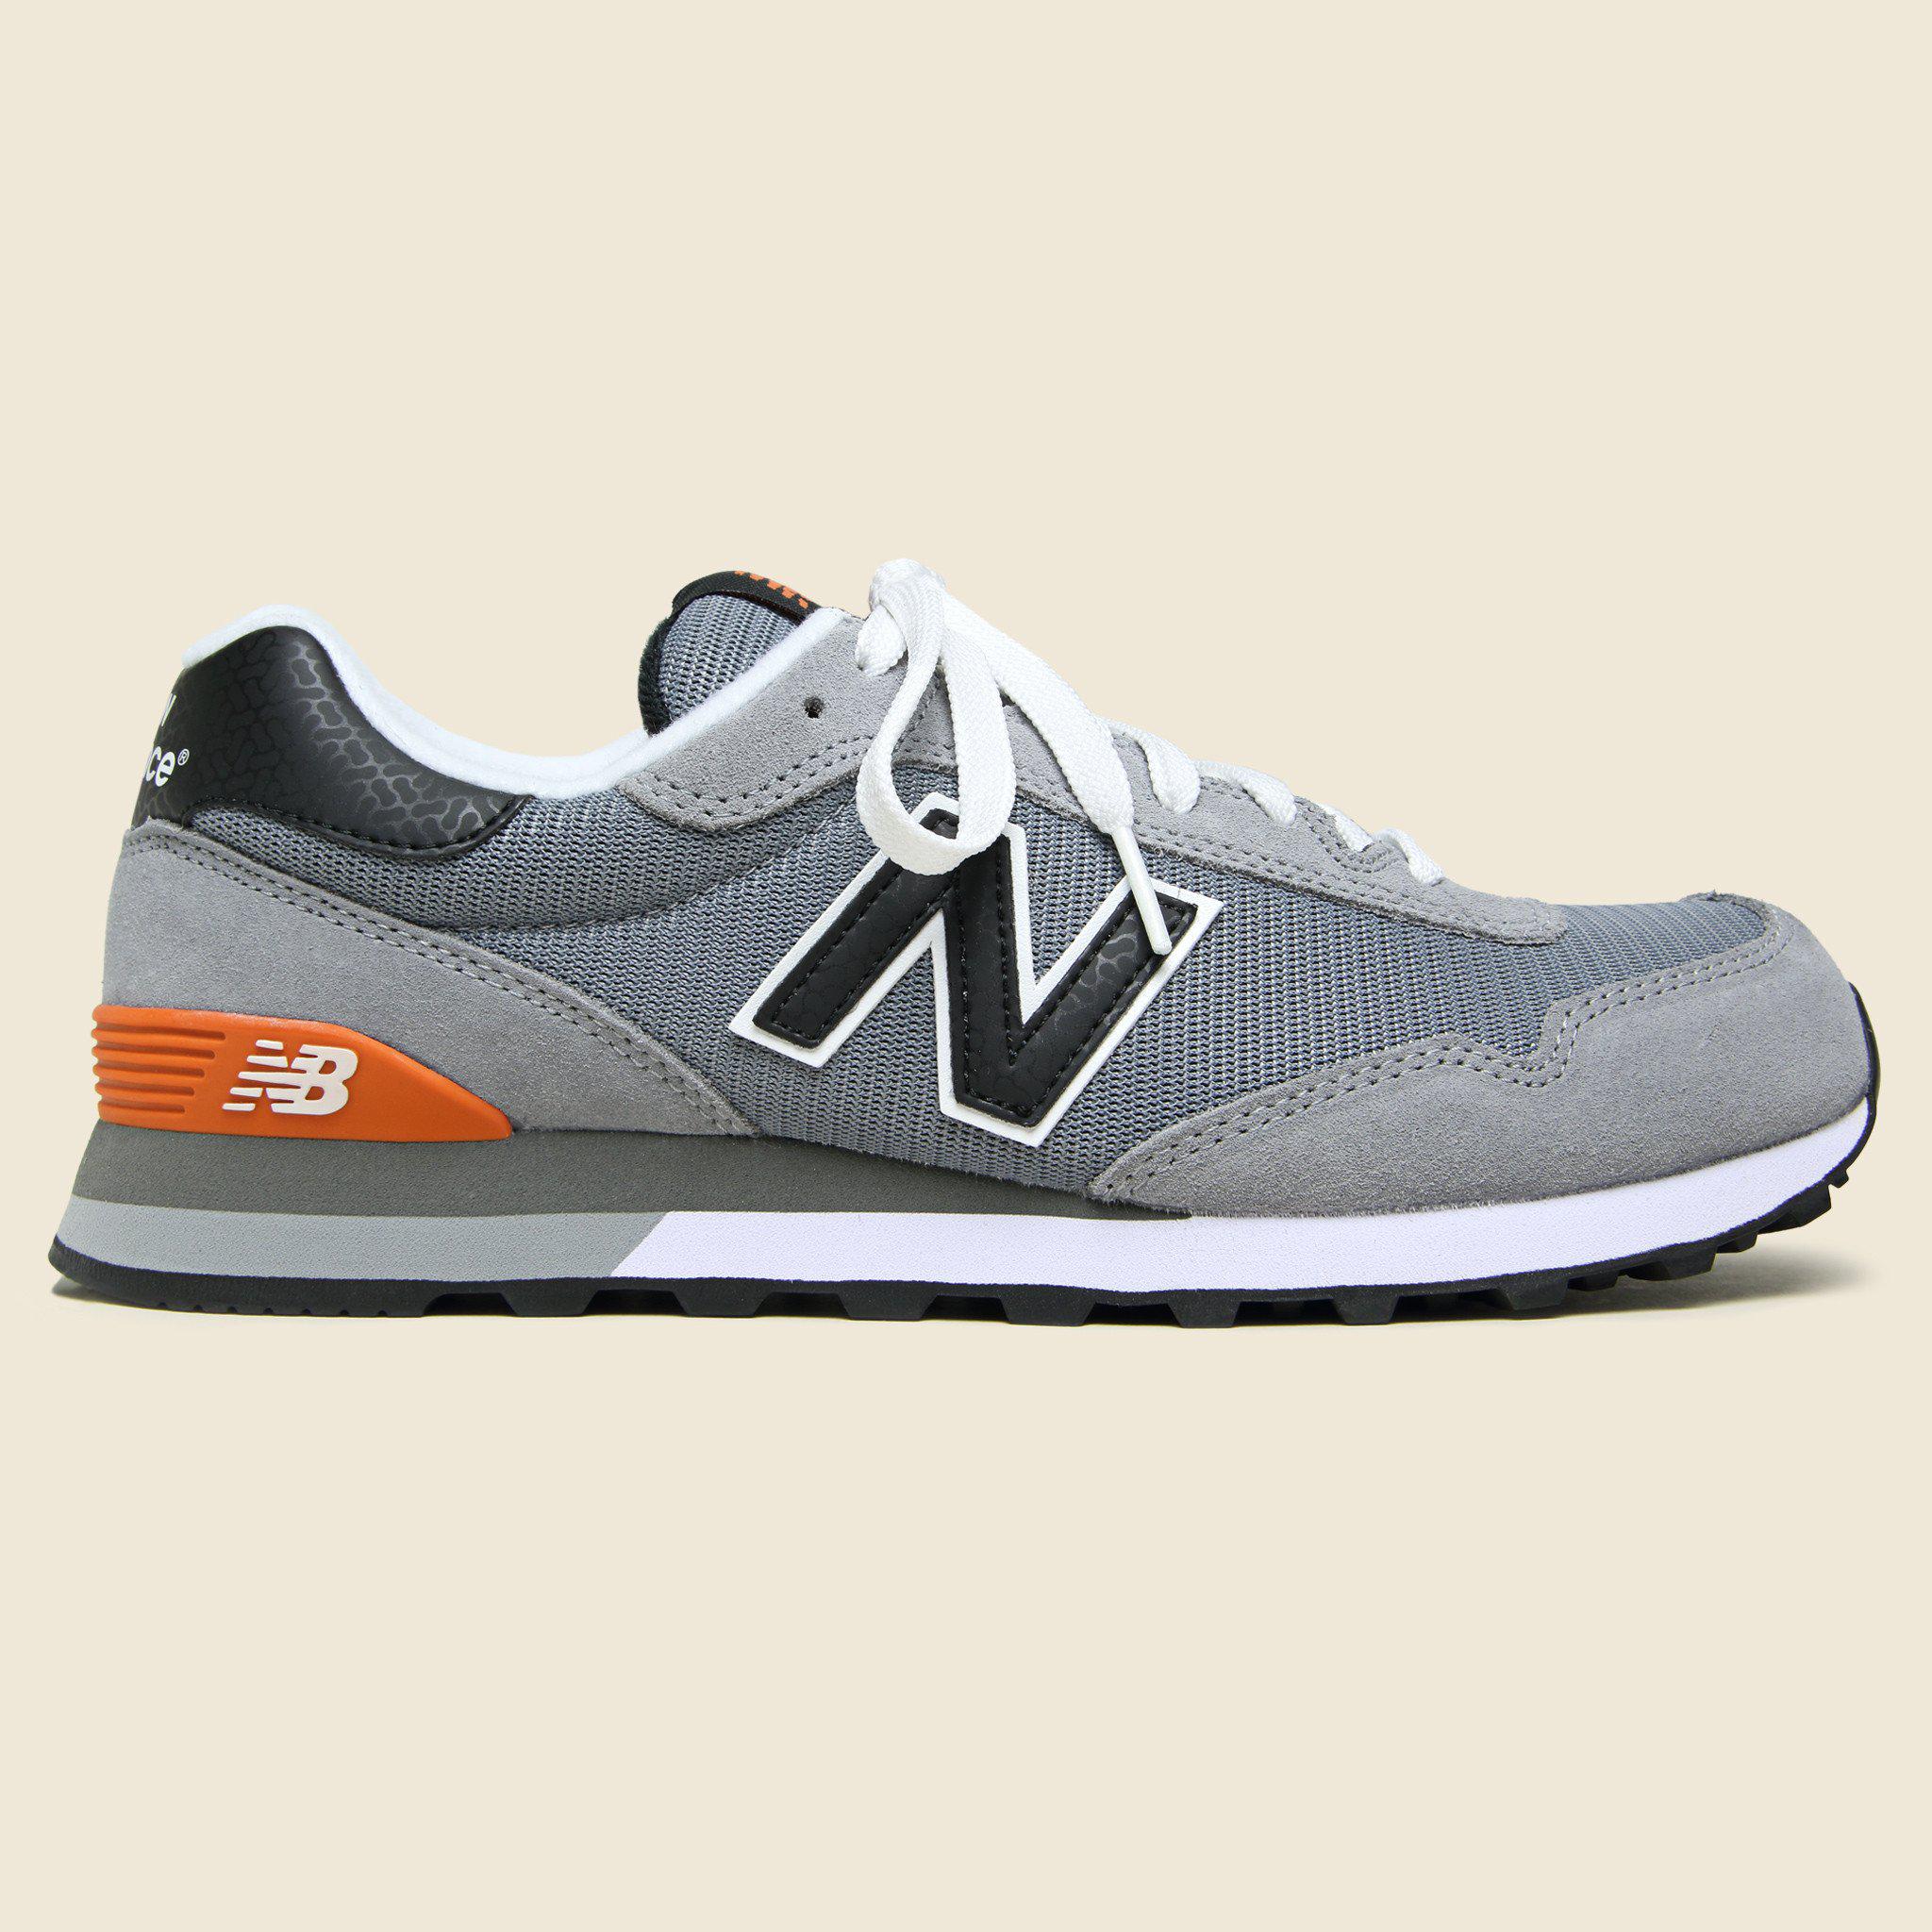 New Balance Suede 515 Sneaker in Grey (Gray) for Men - Lyst